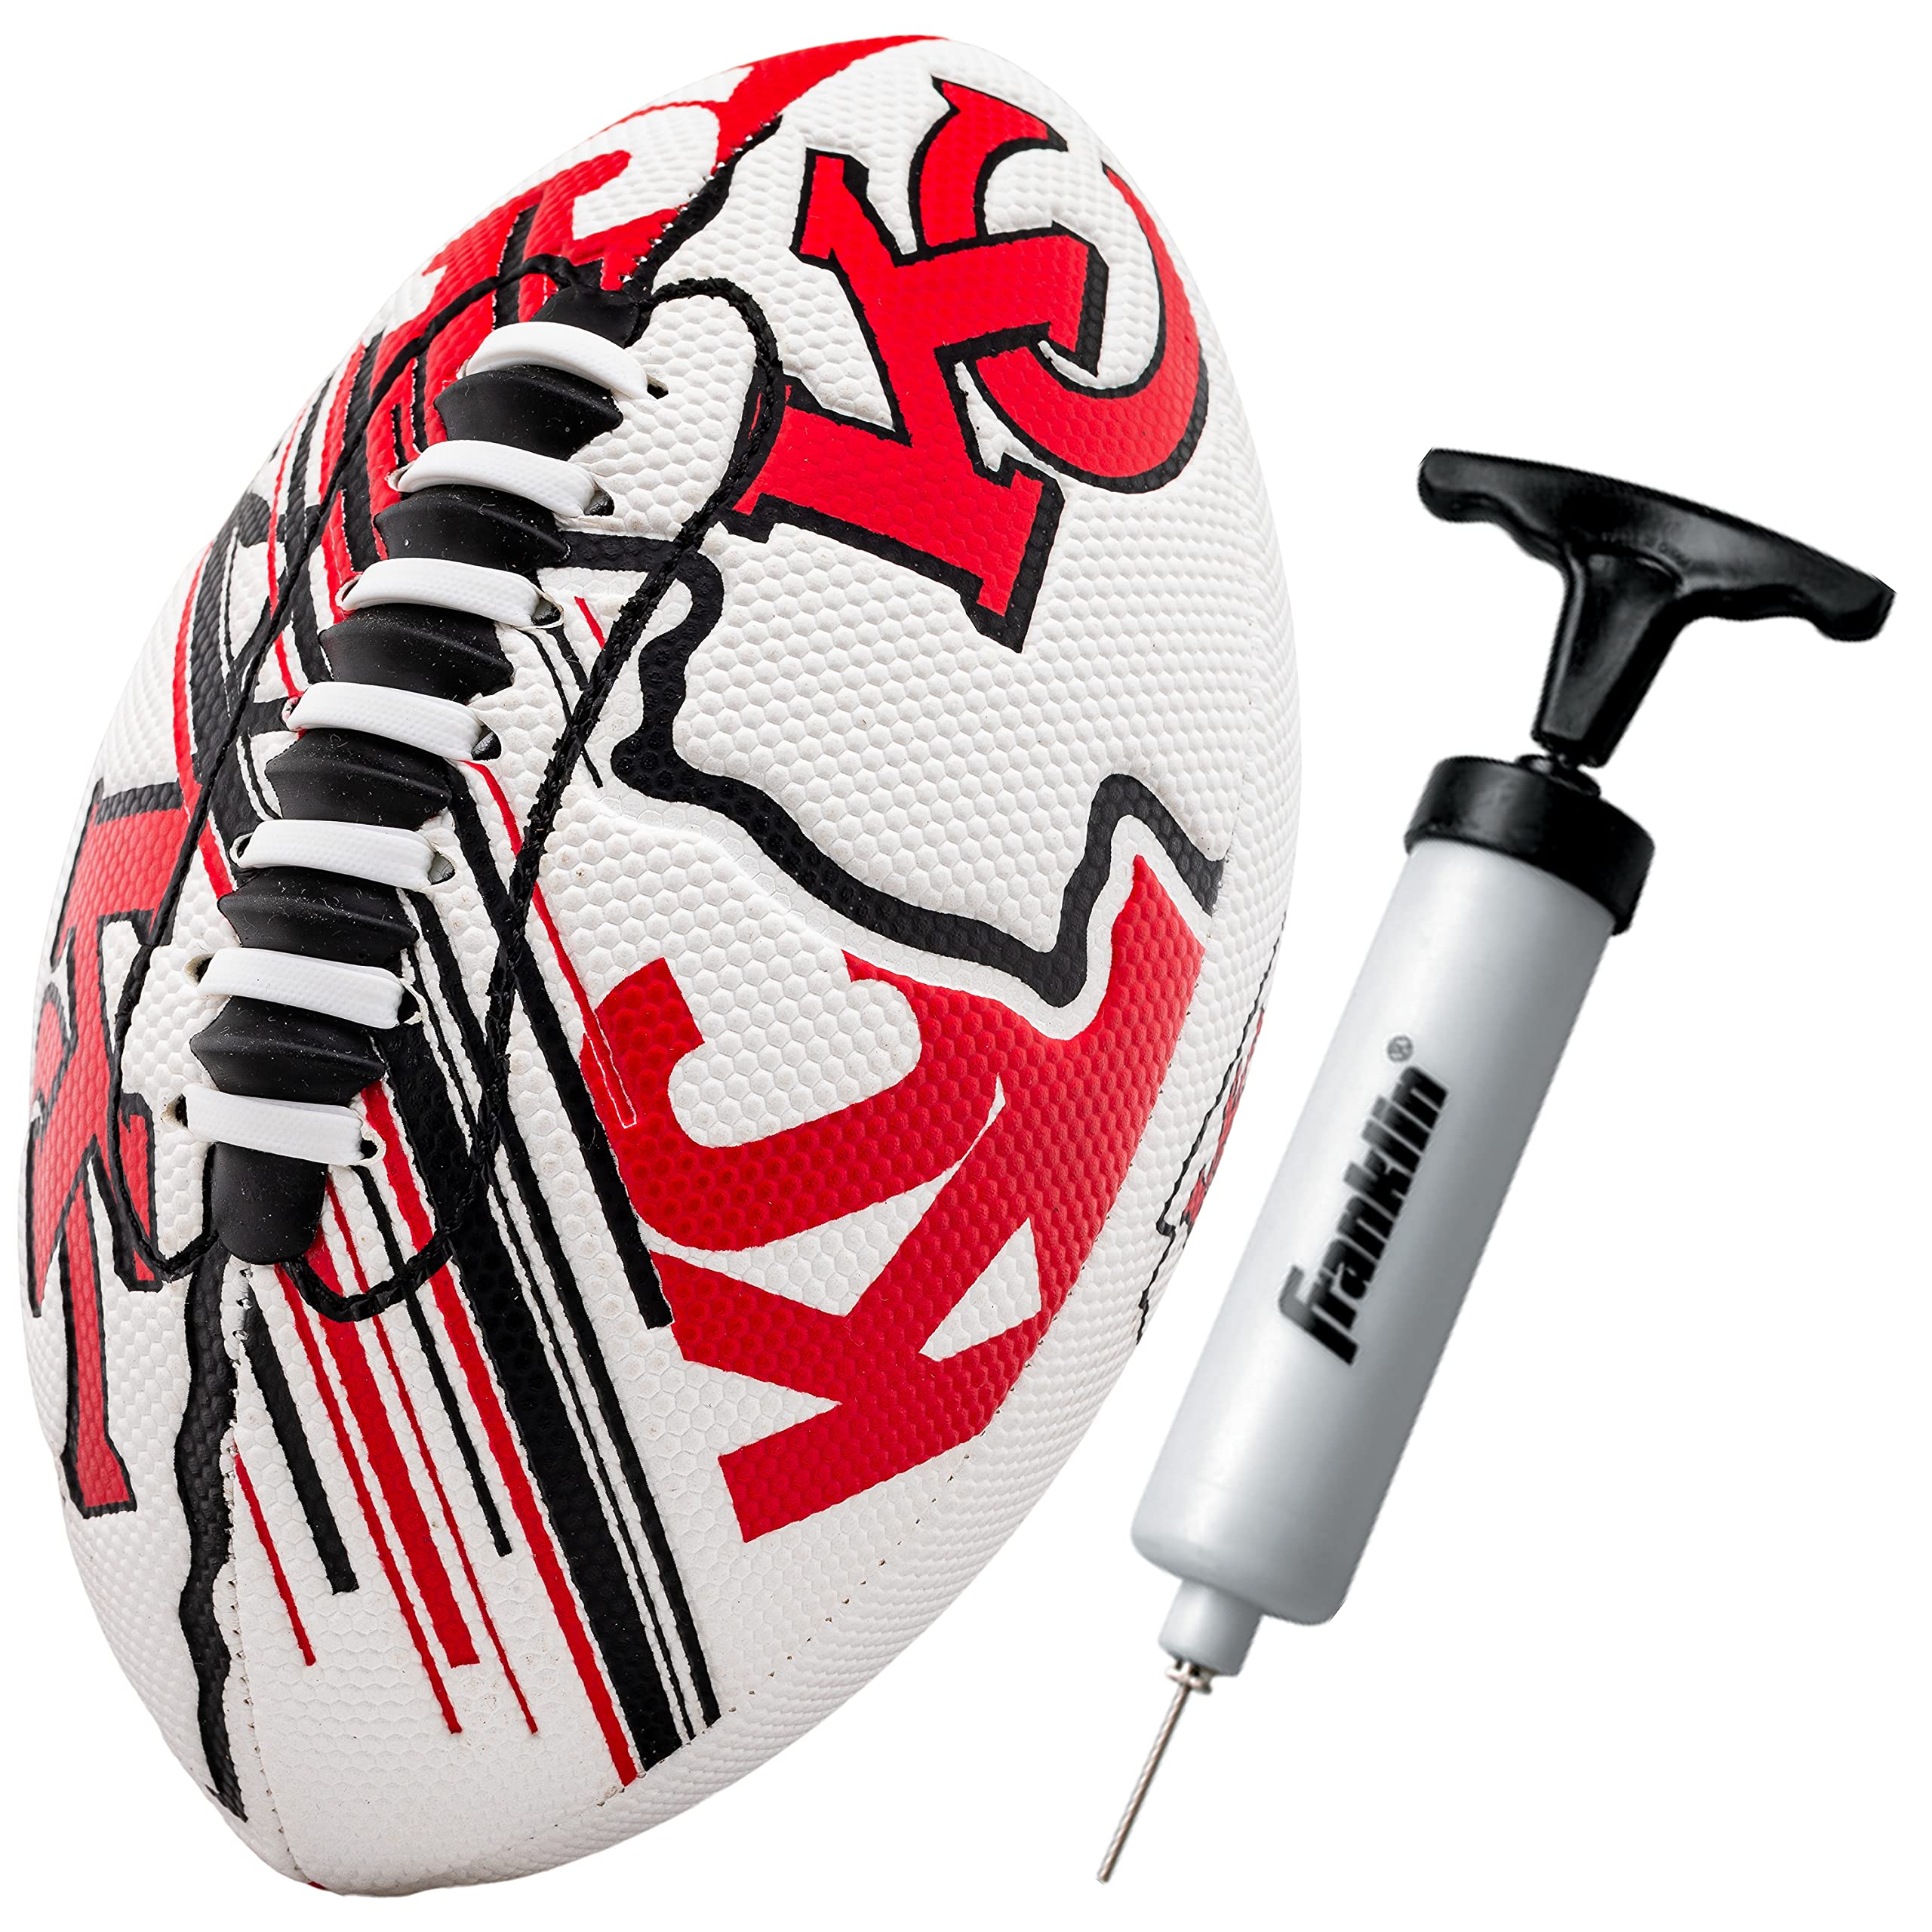 Franklin Sports NFL Kansas city chiefs Football - Youth Mini Football - 8.5 Football- SPAcELAcE Easy grip Texture- Perfect for K